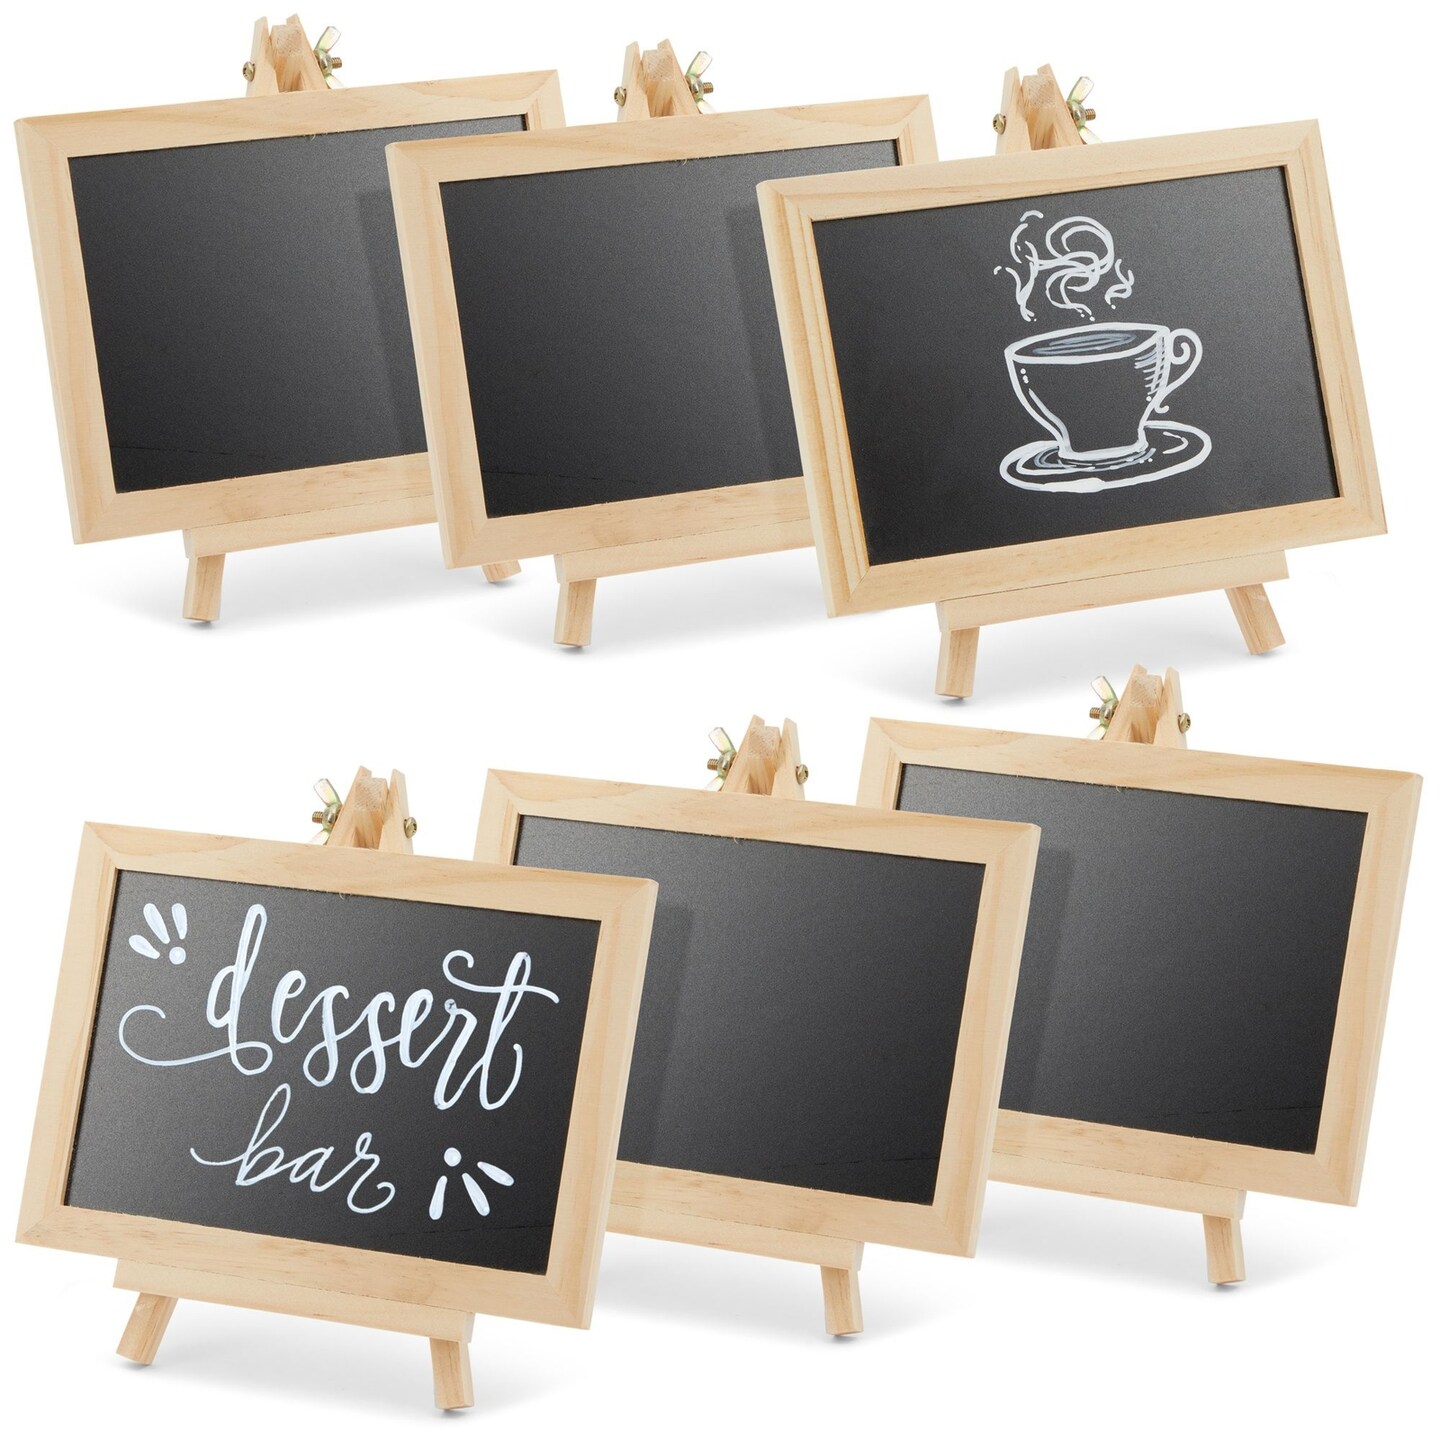 6-Pack Mini Chalkboard Signs with Easel Stand for Table